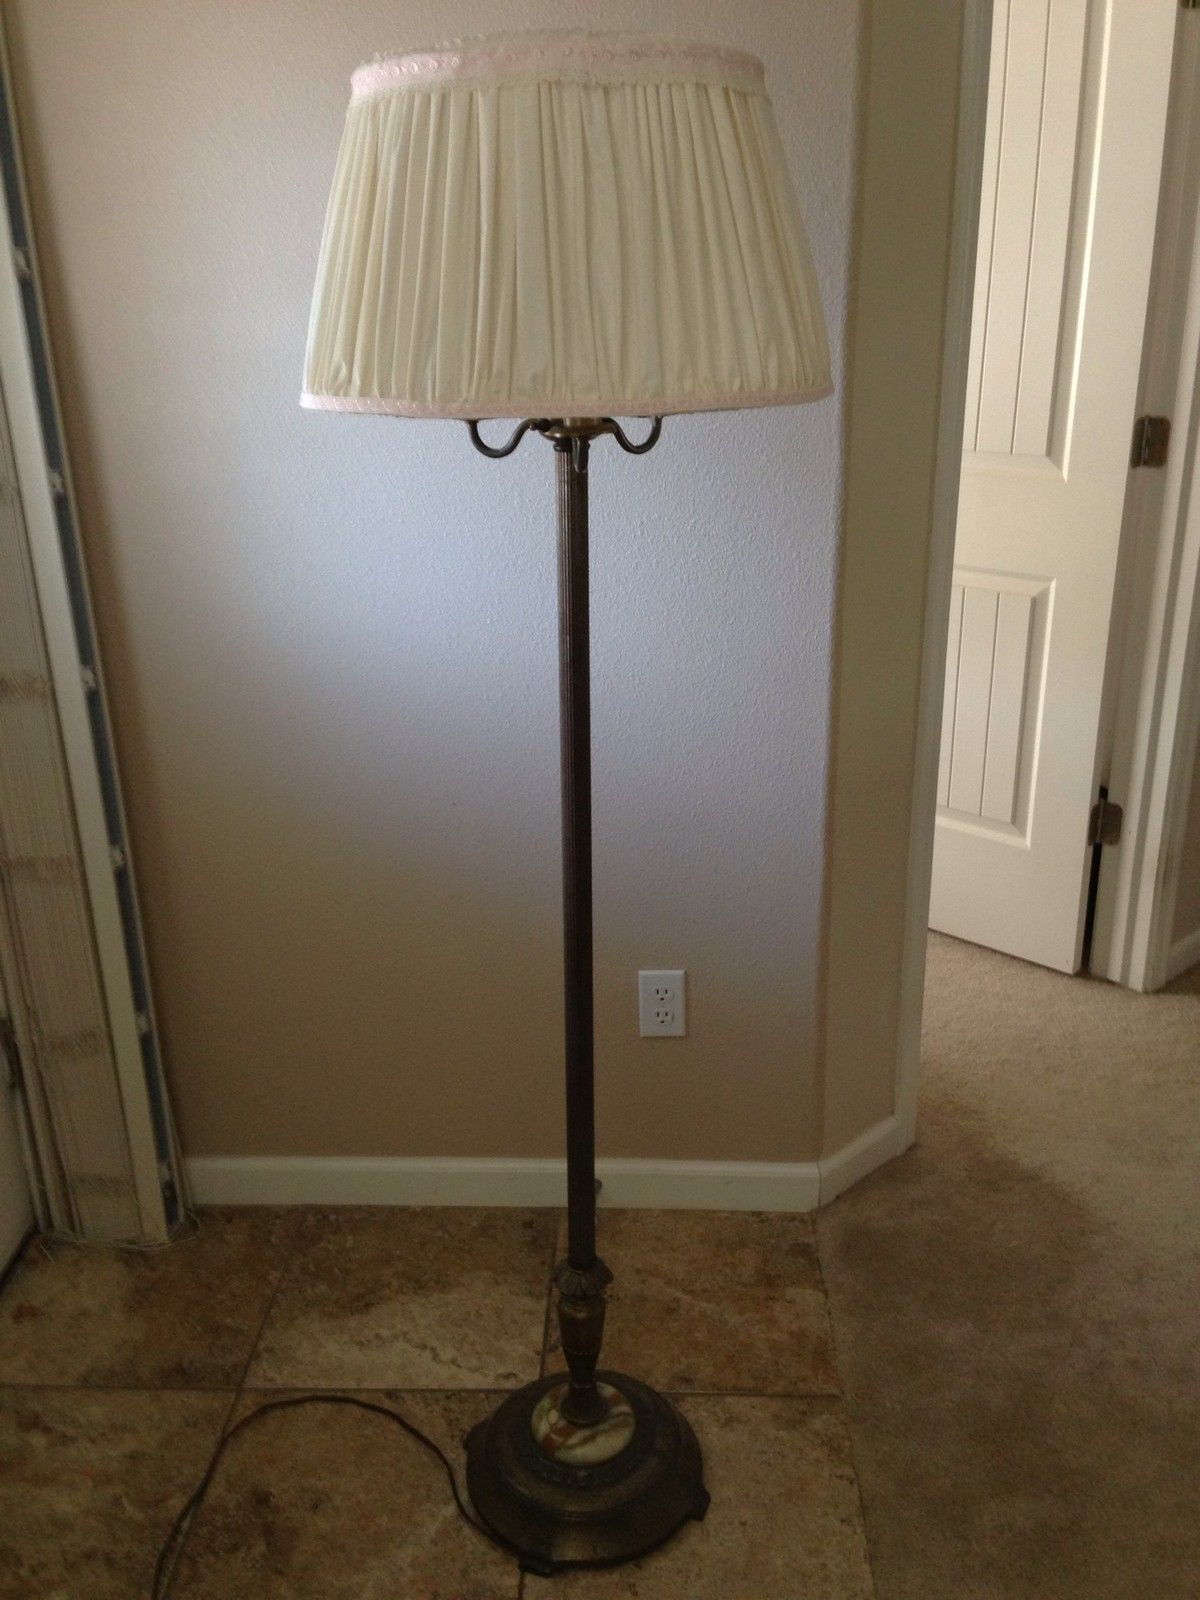 Antique Candelabra Torchiere Floor Lamp With Marble Base regarding sizing 1200 X 1600